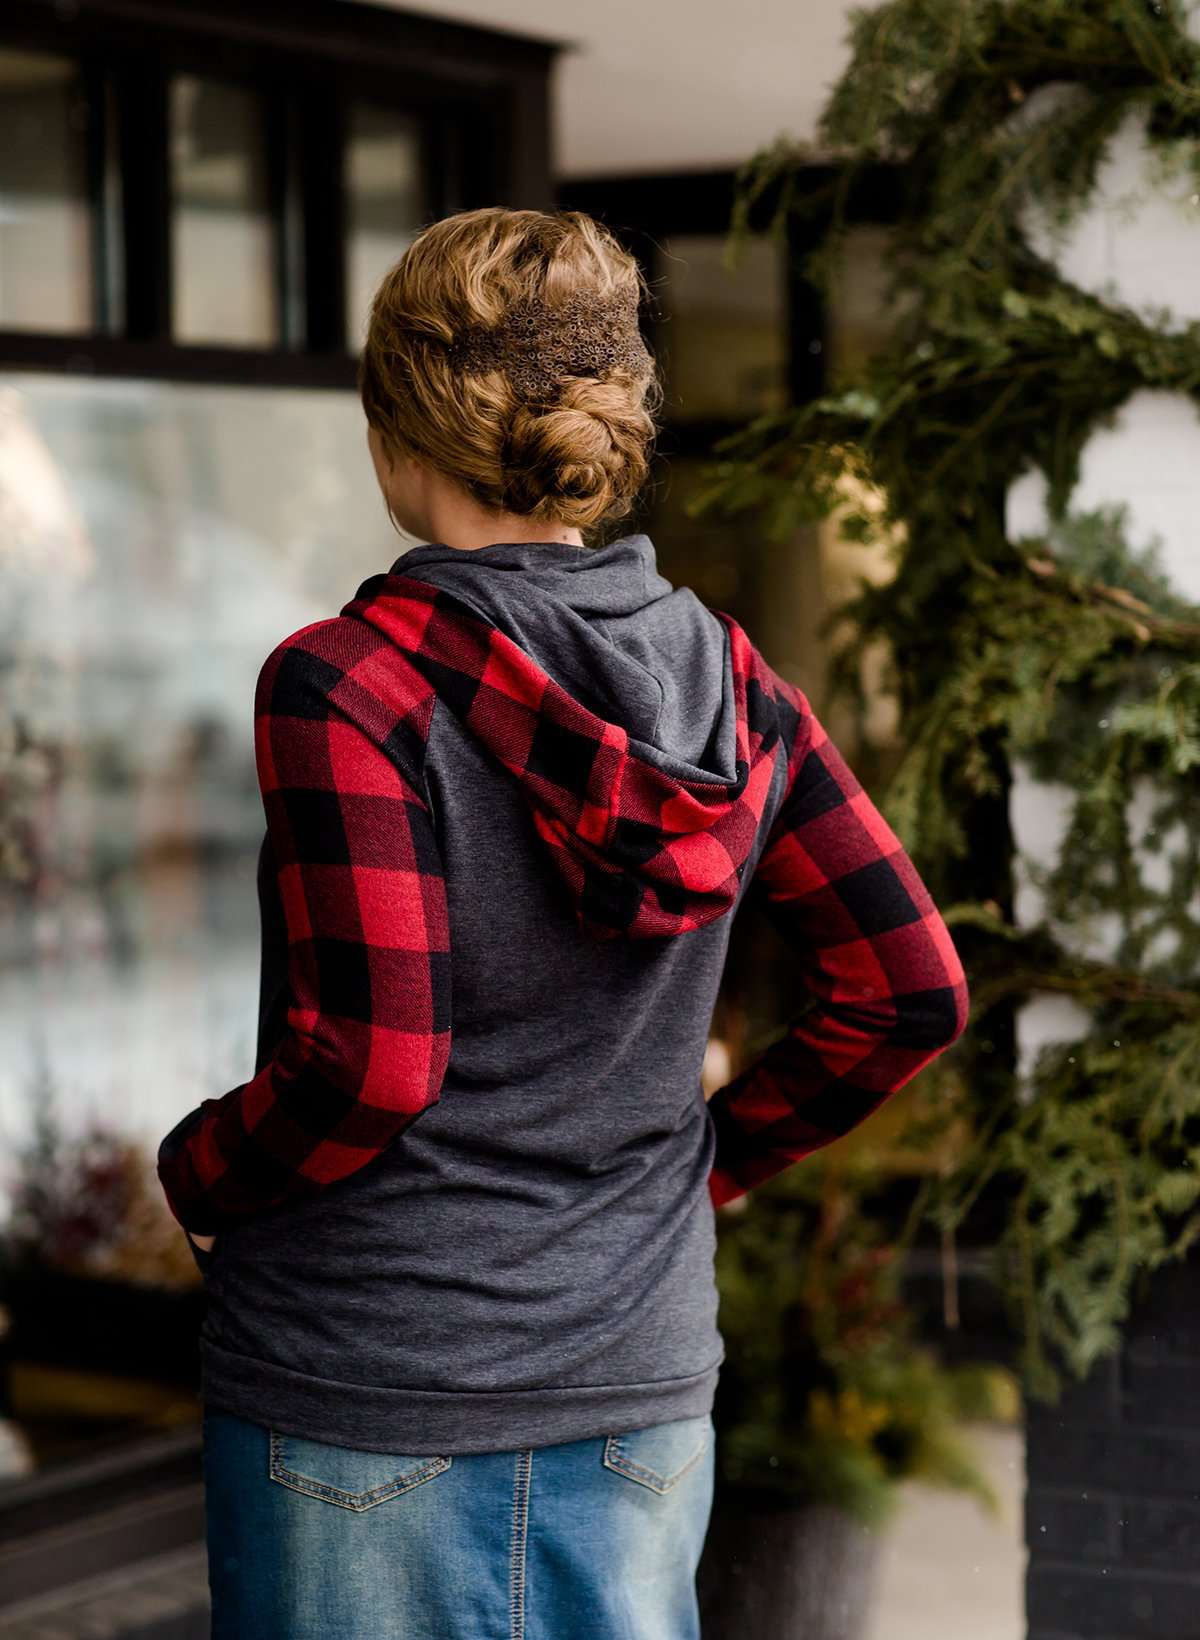 Woman at Inherit Clothingn Company wearing a charcoal and buffalo check hooded top with front kangaroo pocket.